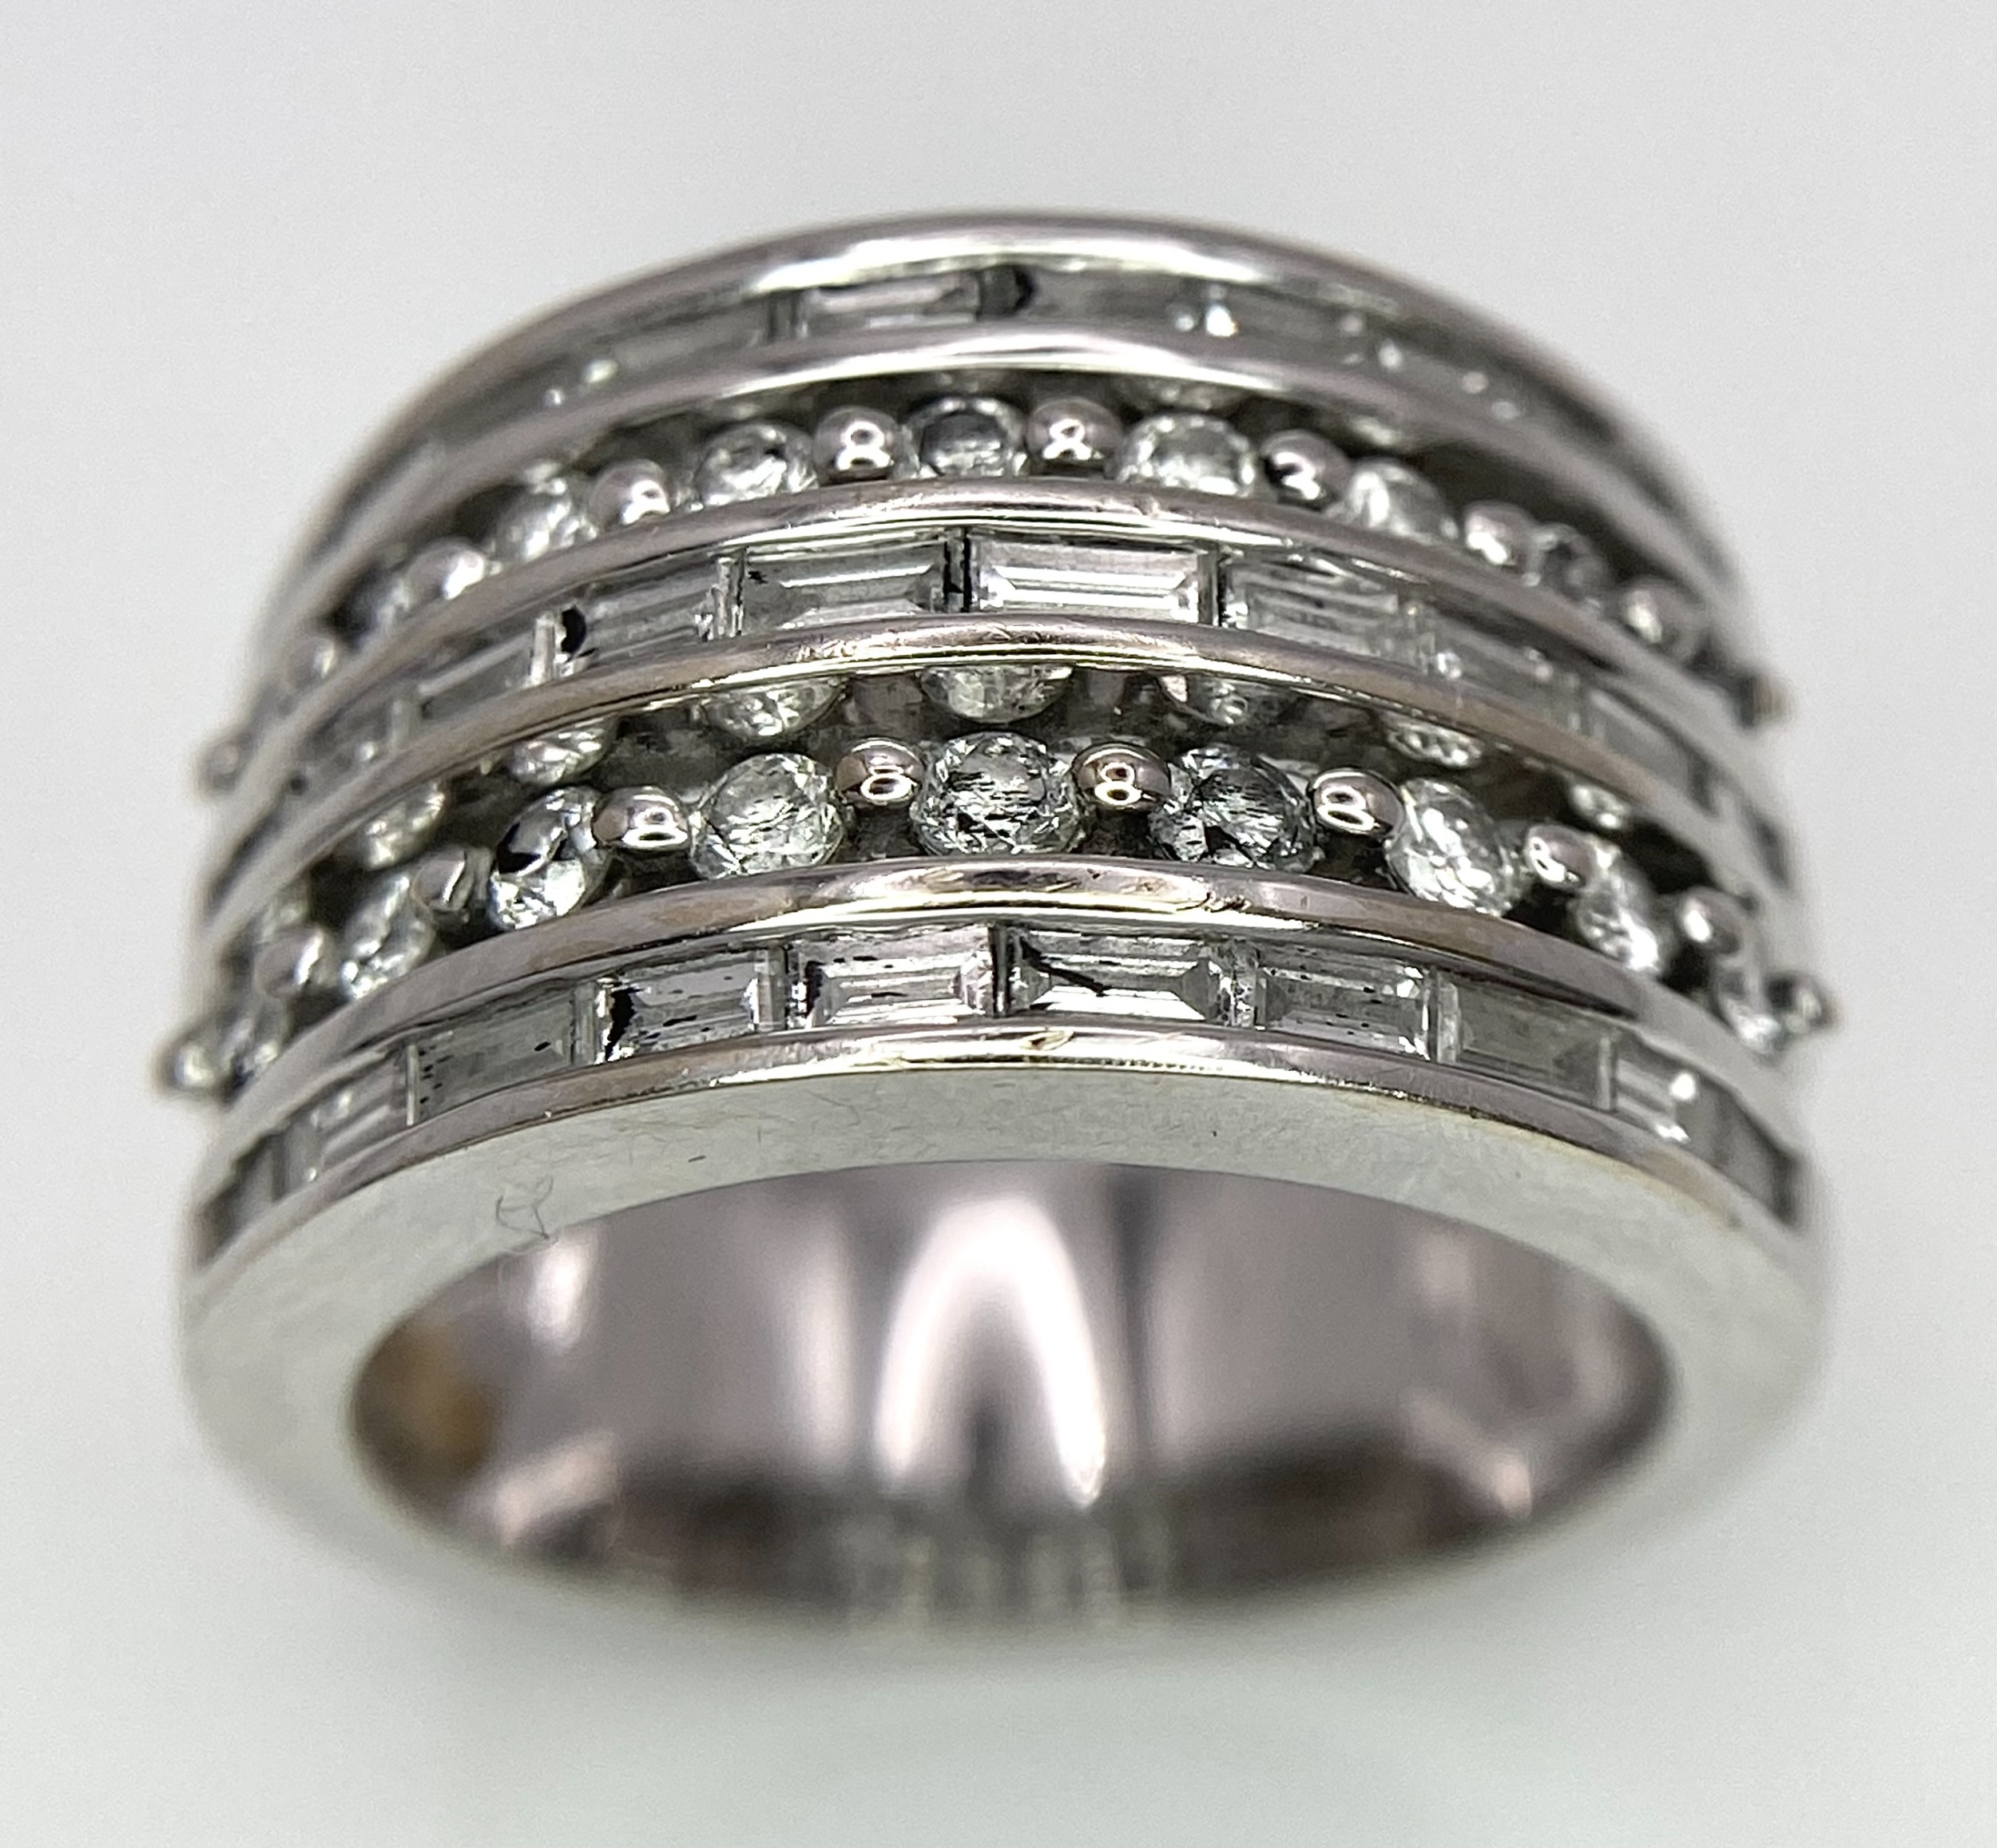 AN 18K WHITE GOLD 5 ROW DIAMOND RING. MIXTURE OF ROUND BRILLIANT CUTS AND BAGUETTE CUT DIAMONDS. - Image 2 of 9